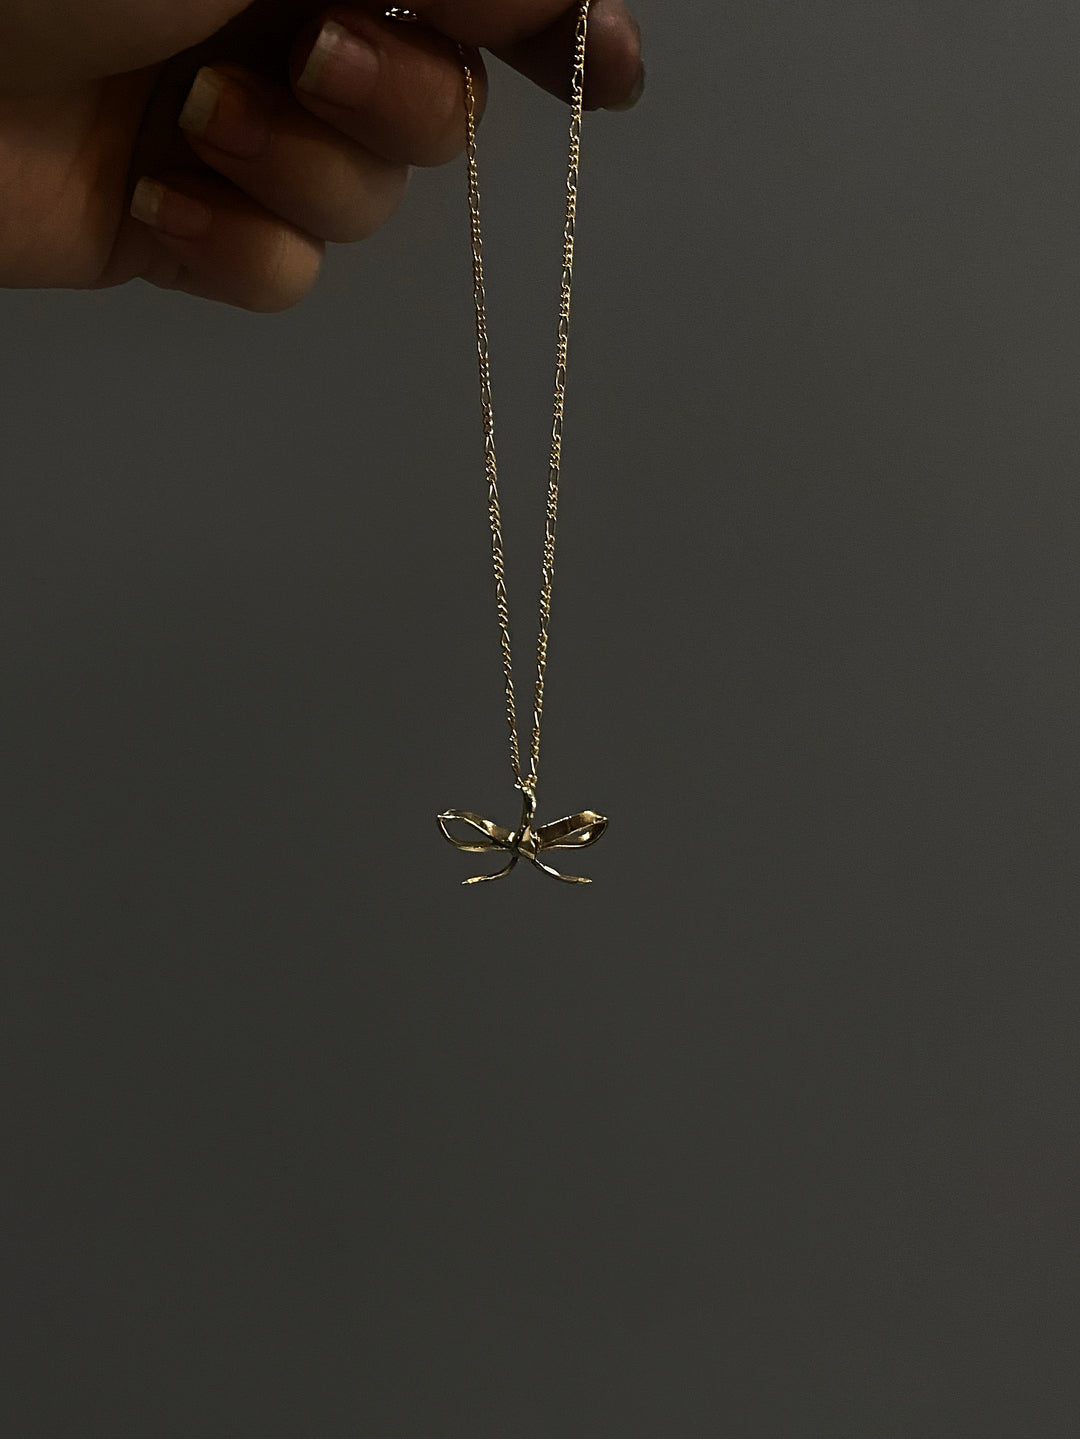 Small bow pendant necklace hanging from hand